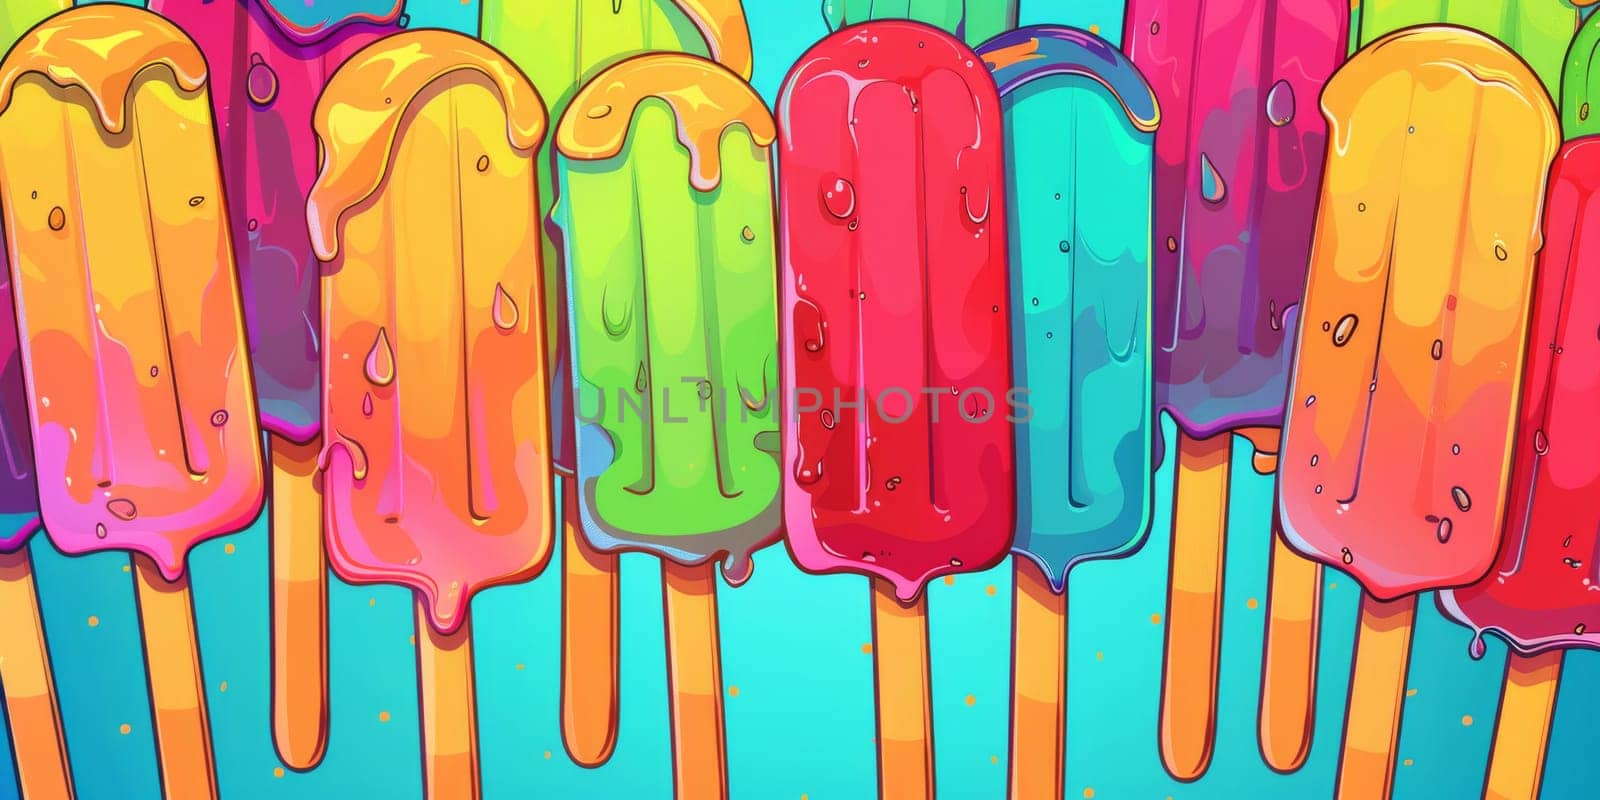 Colorful ice lolly as a background or texture